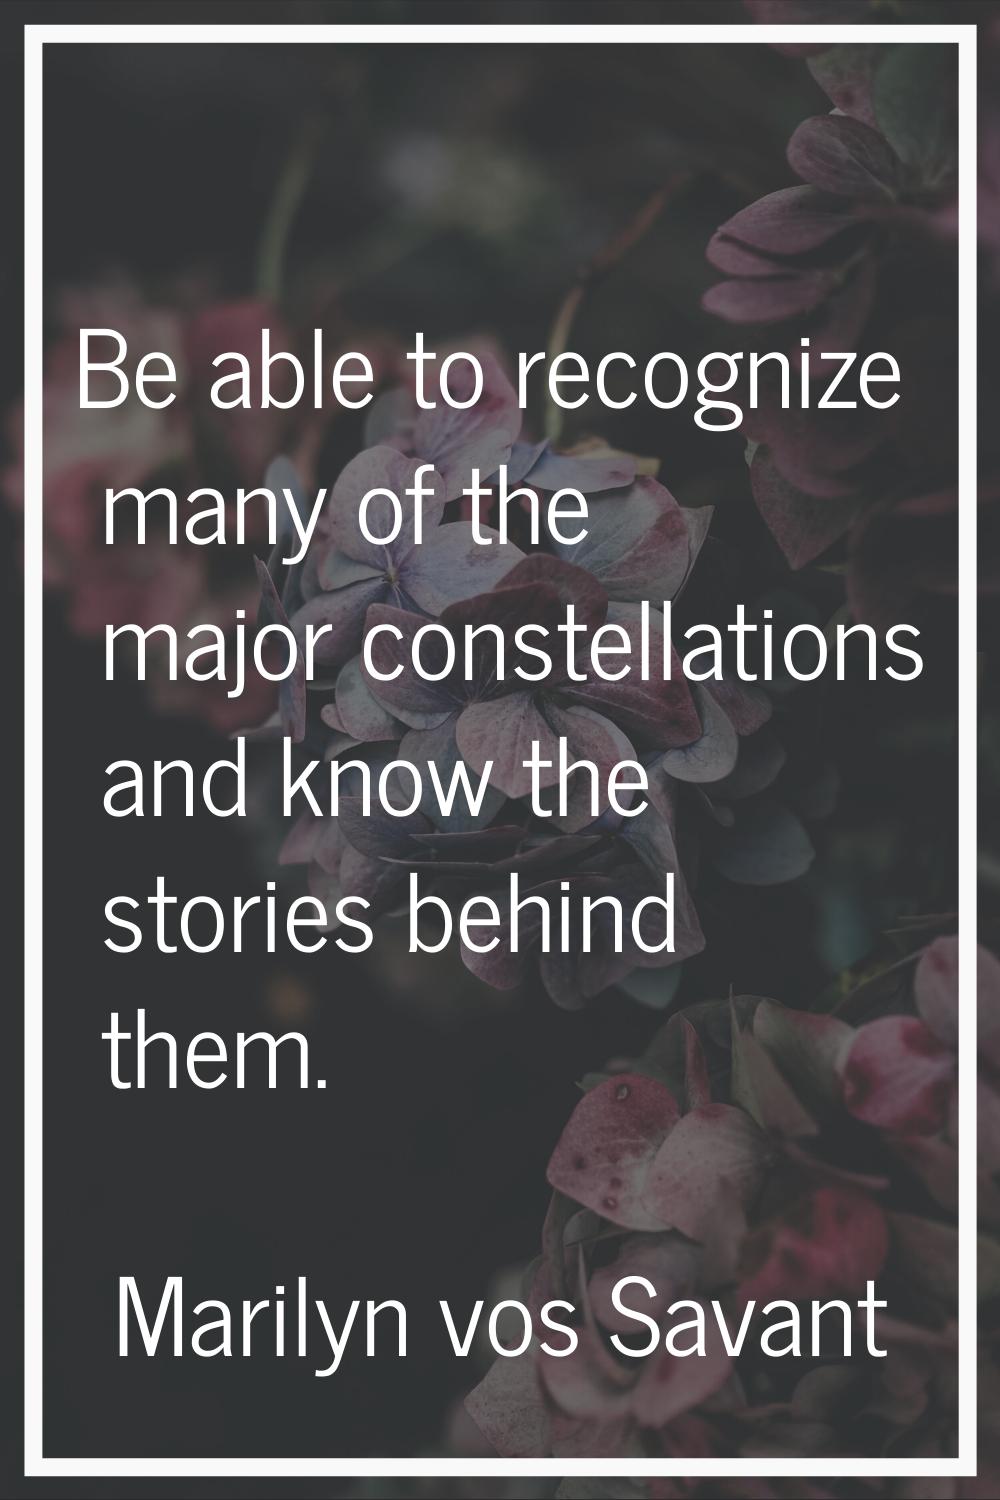 Be able to recognize many of the major constellations and know the stories behind them.